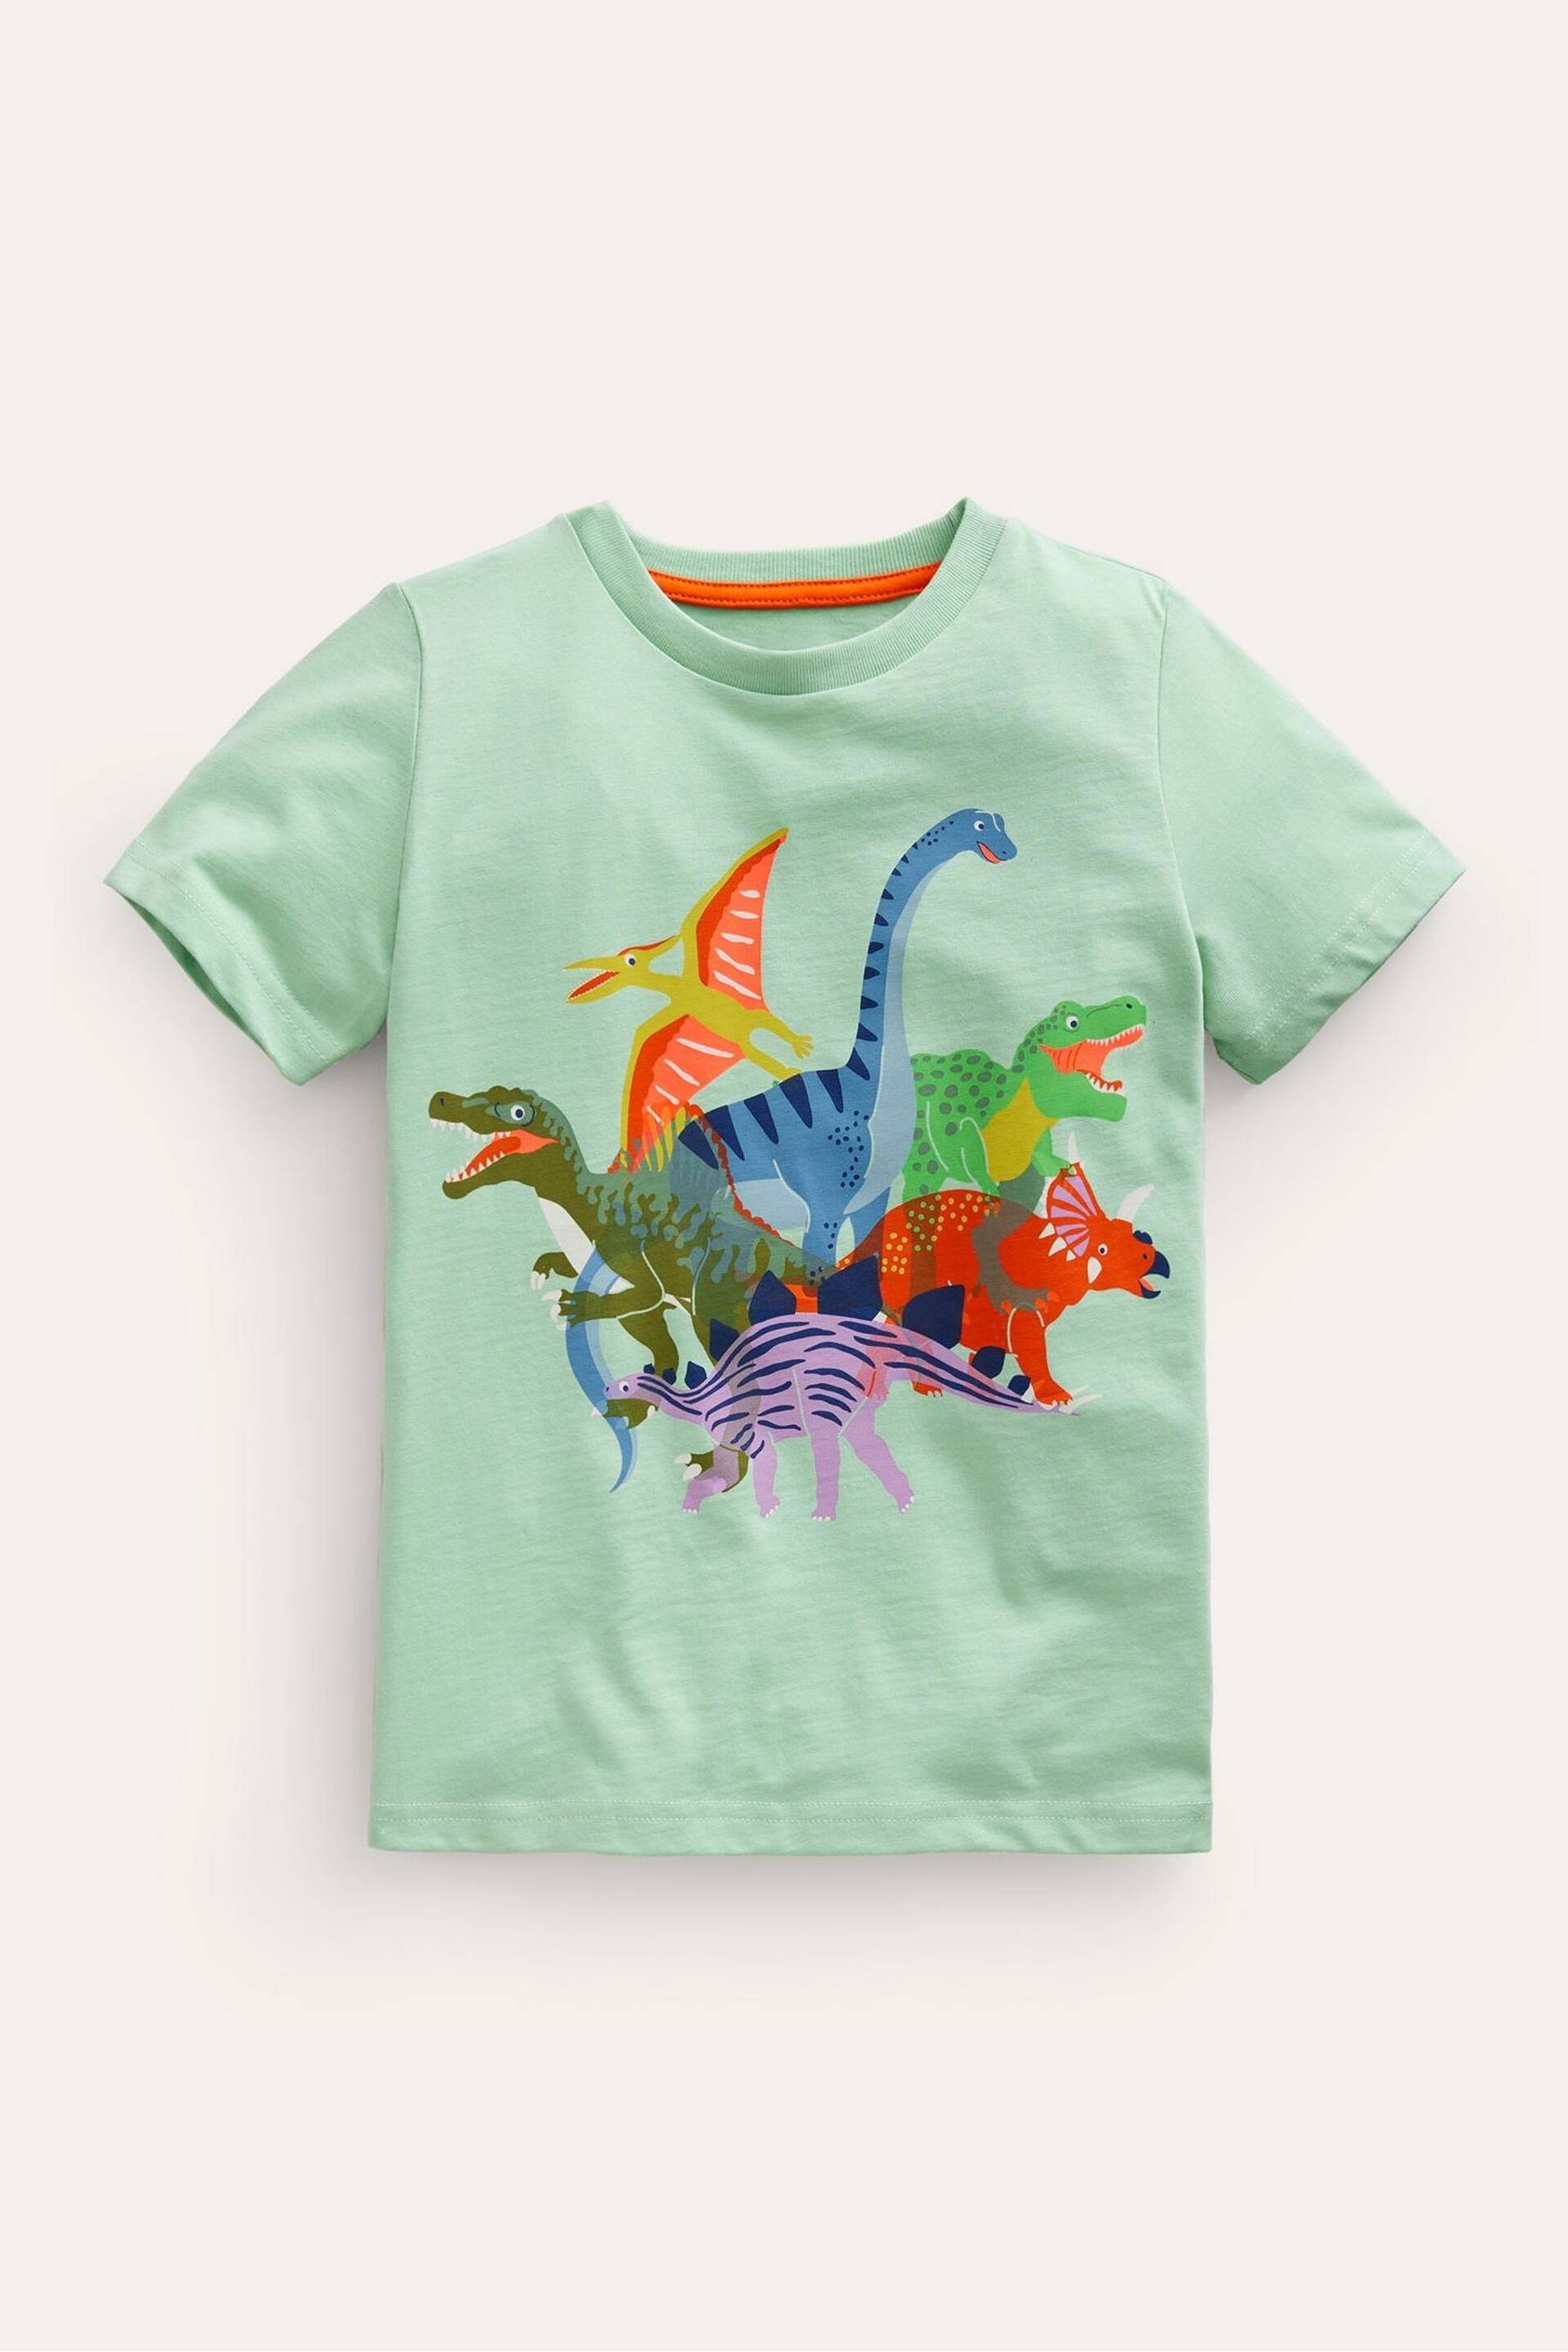 Boden Green Riso Printed T-shirt - Image 1 of 3